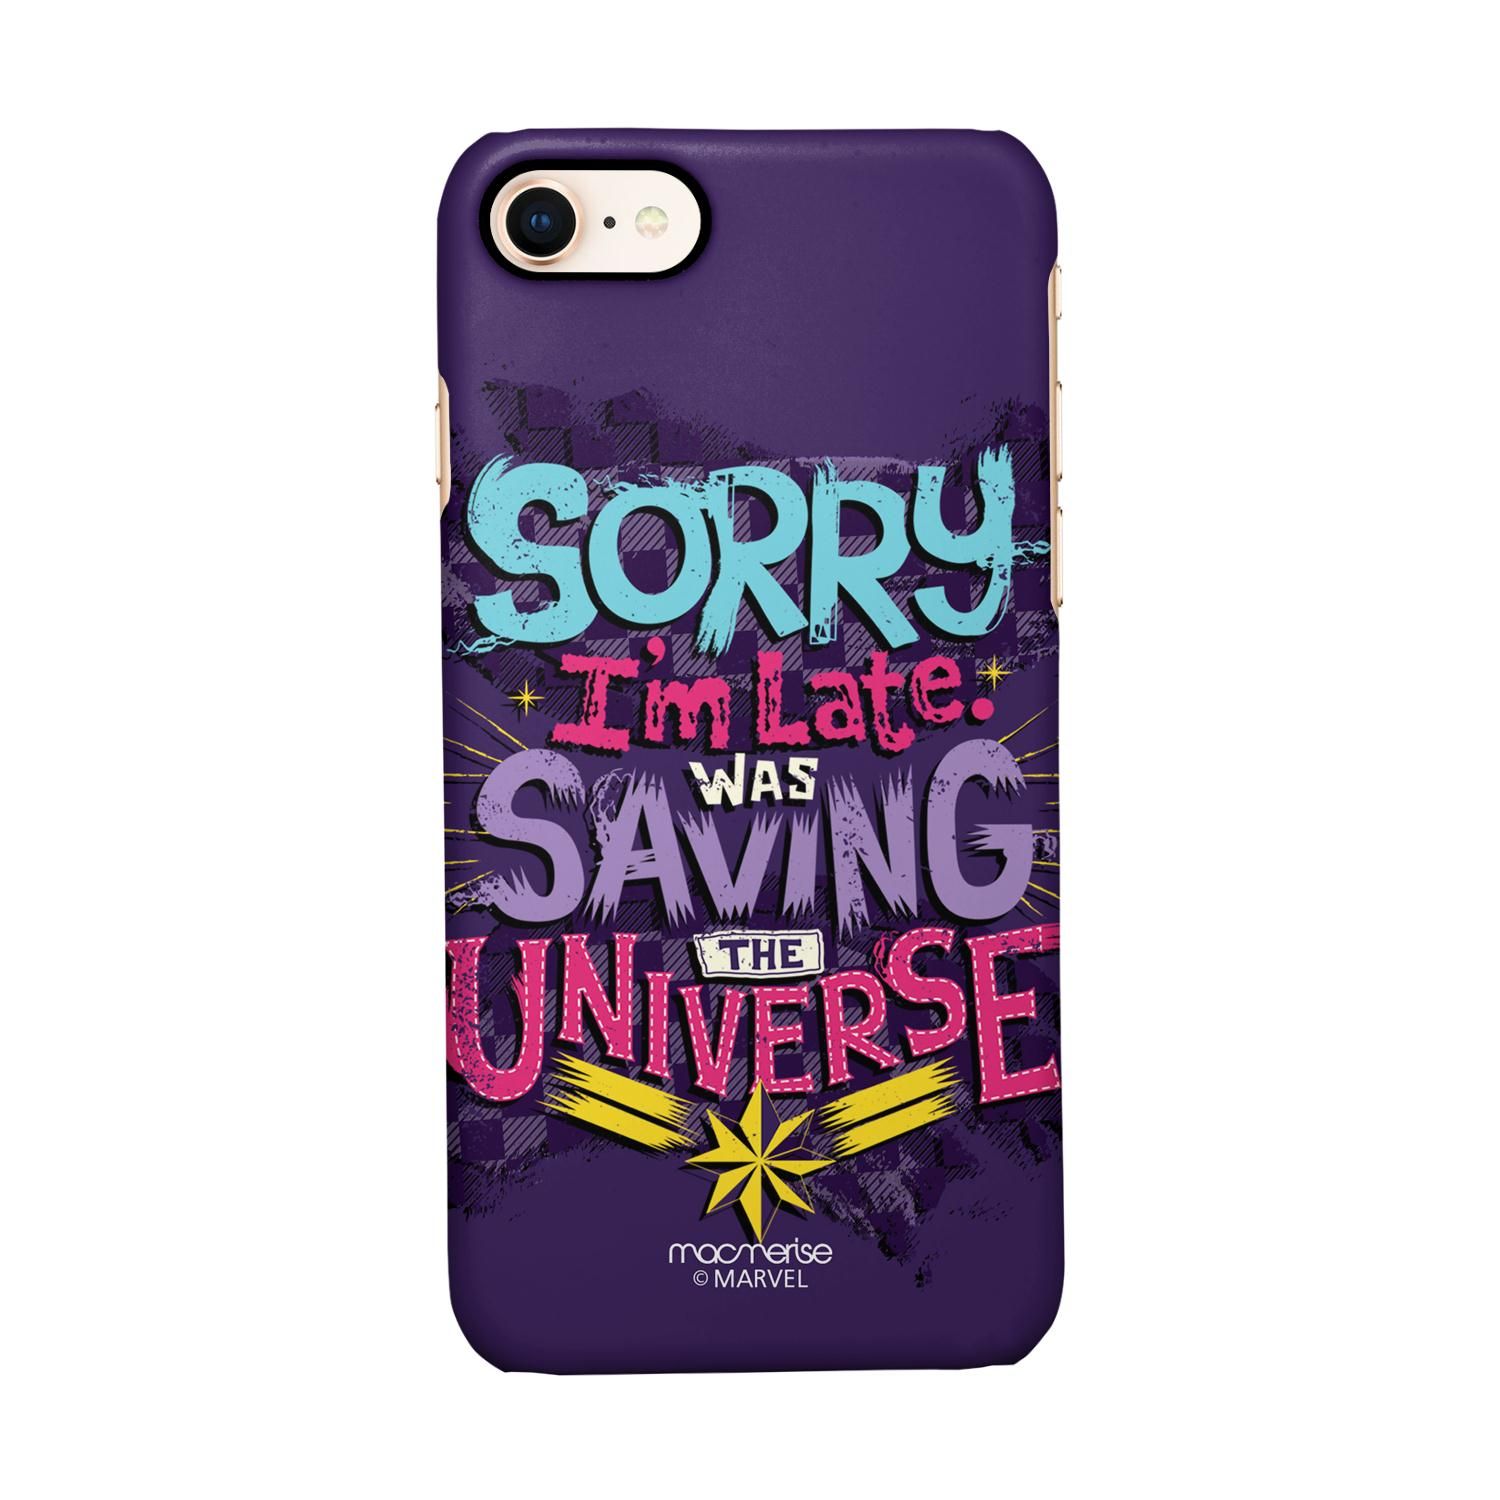 Buy Saving The Universe - Sleek Phone Case for iPhone 7 Online